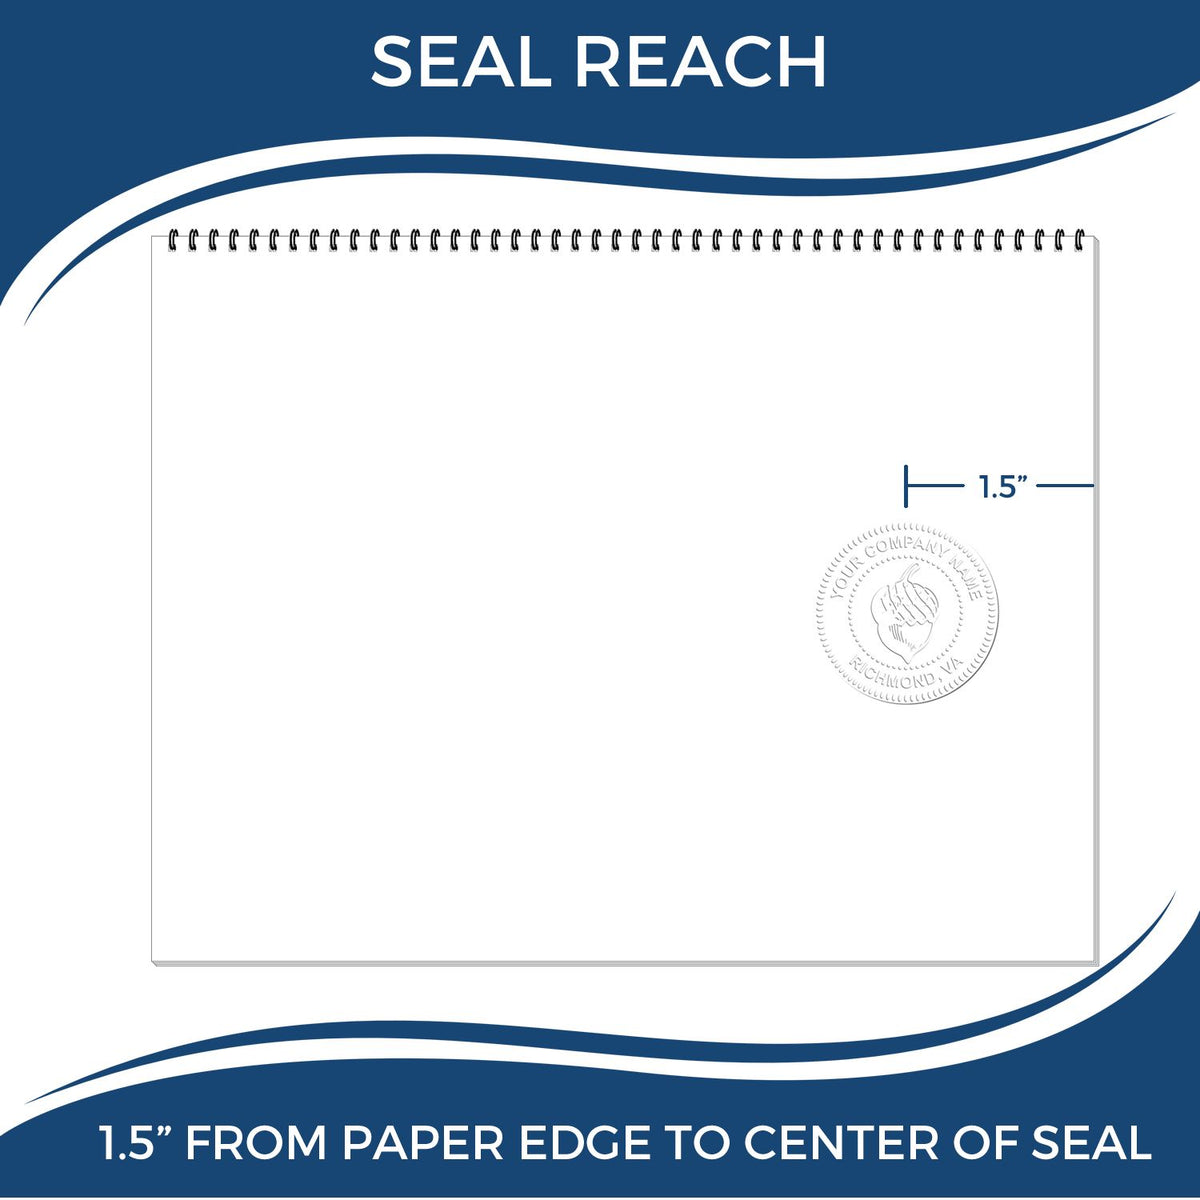 An infographic showing the seal reach which is represented by a ruler and a miniature seal image of the Soft South Dakota Professional Engineer Seal